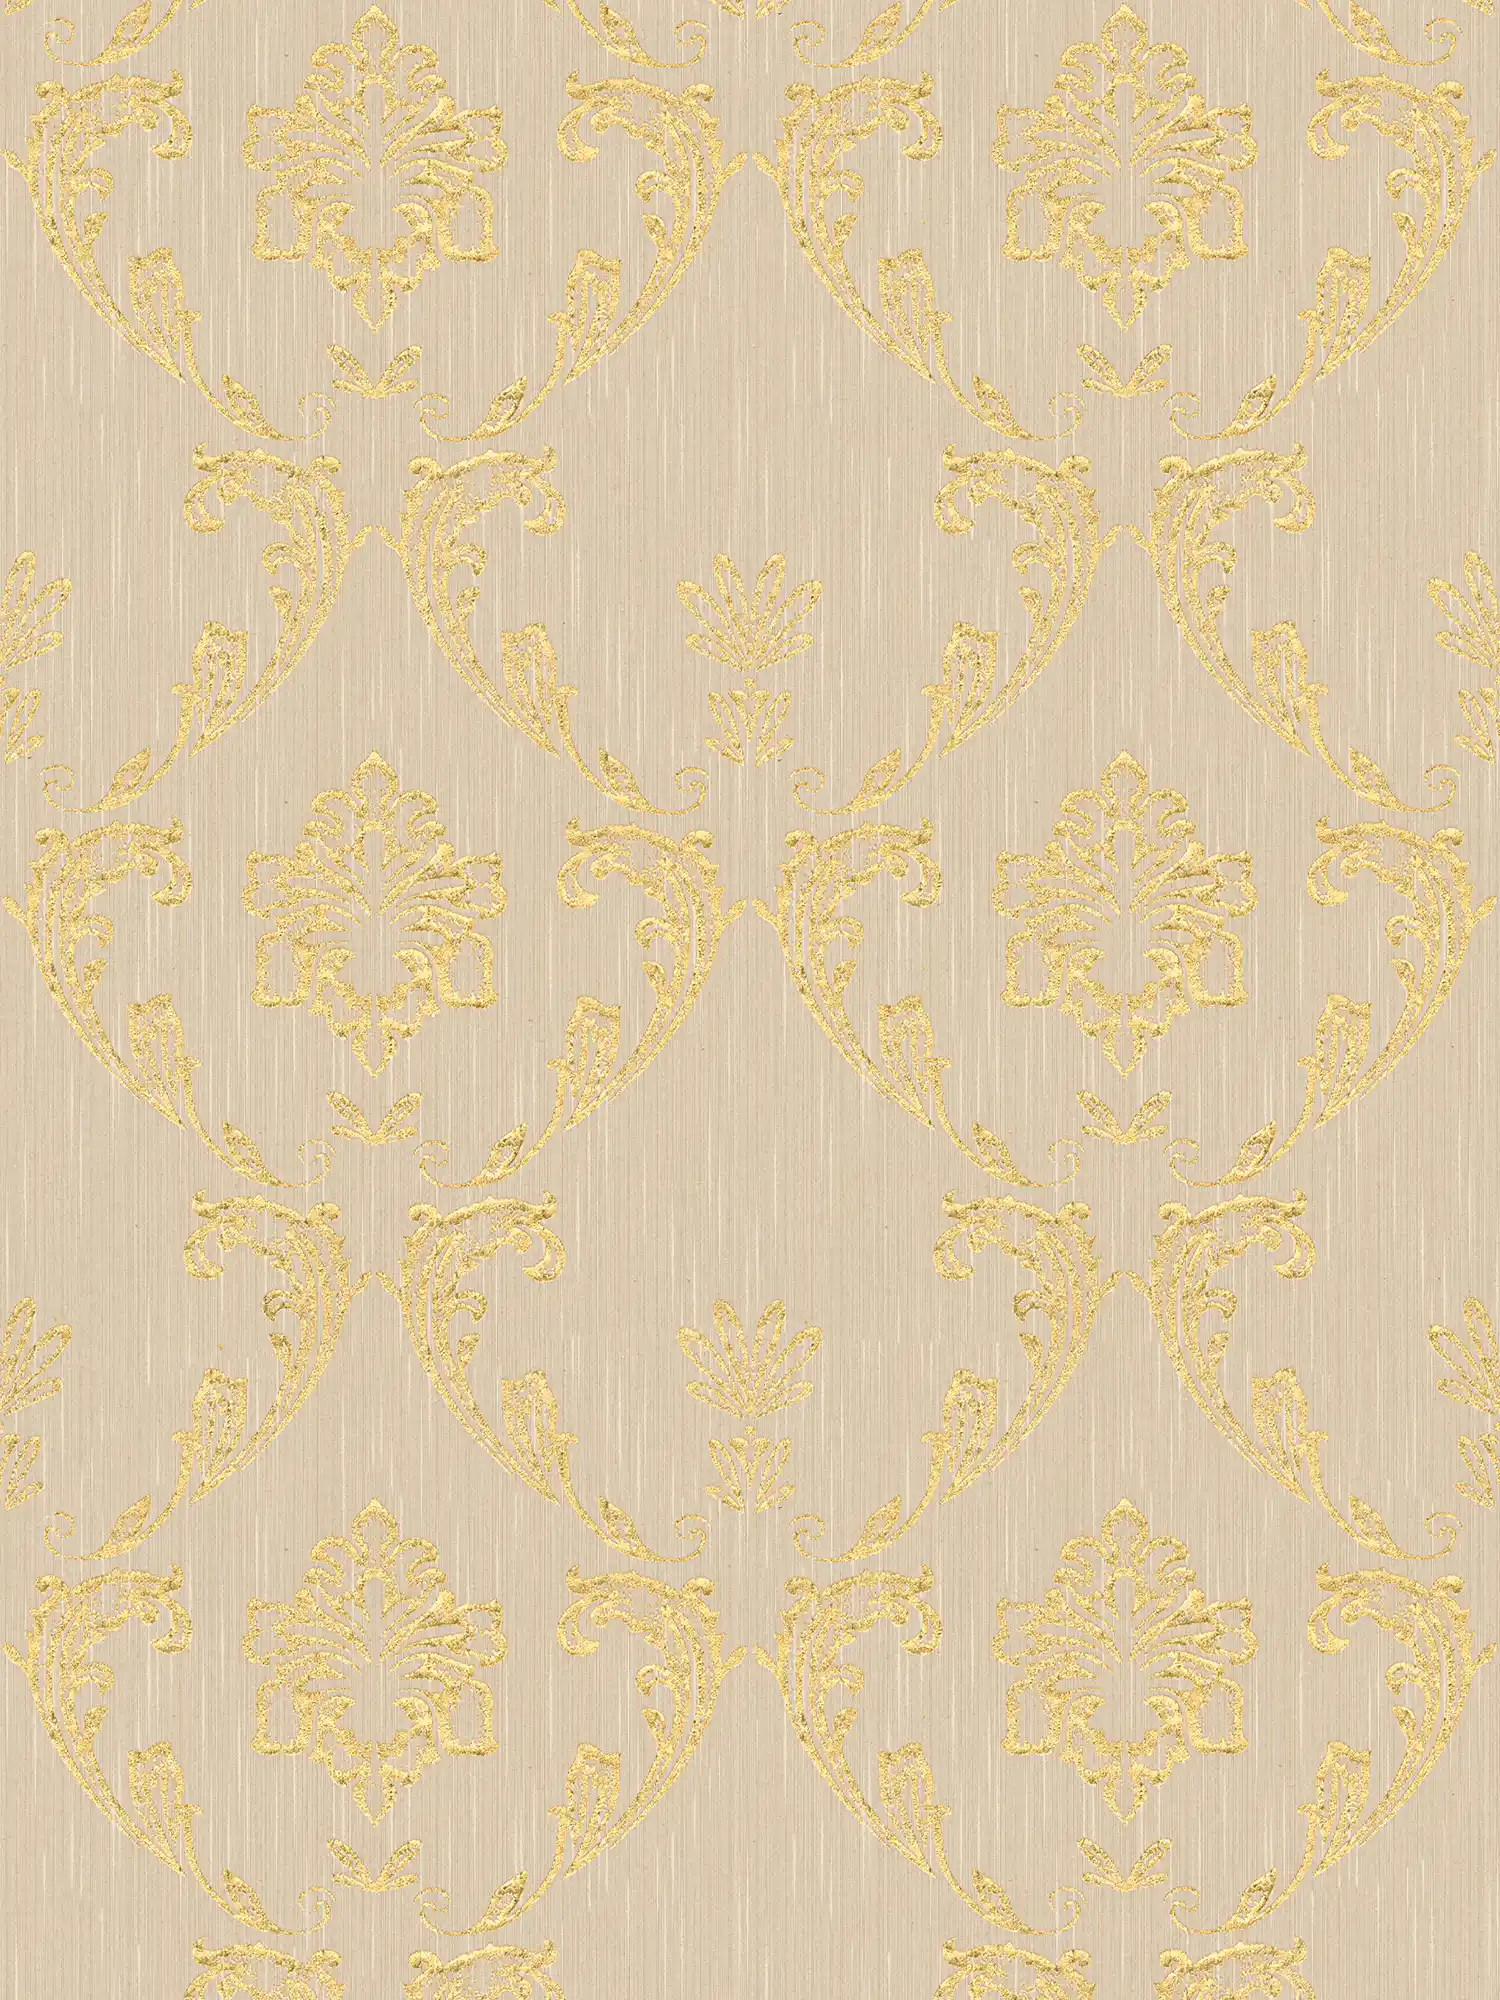 Ornamental wallpaper with floral elements in gold - gold, beige
